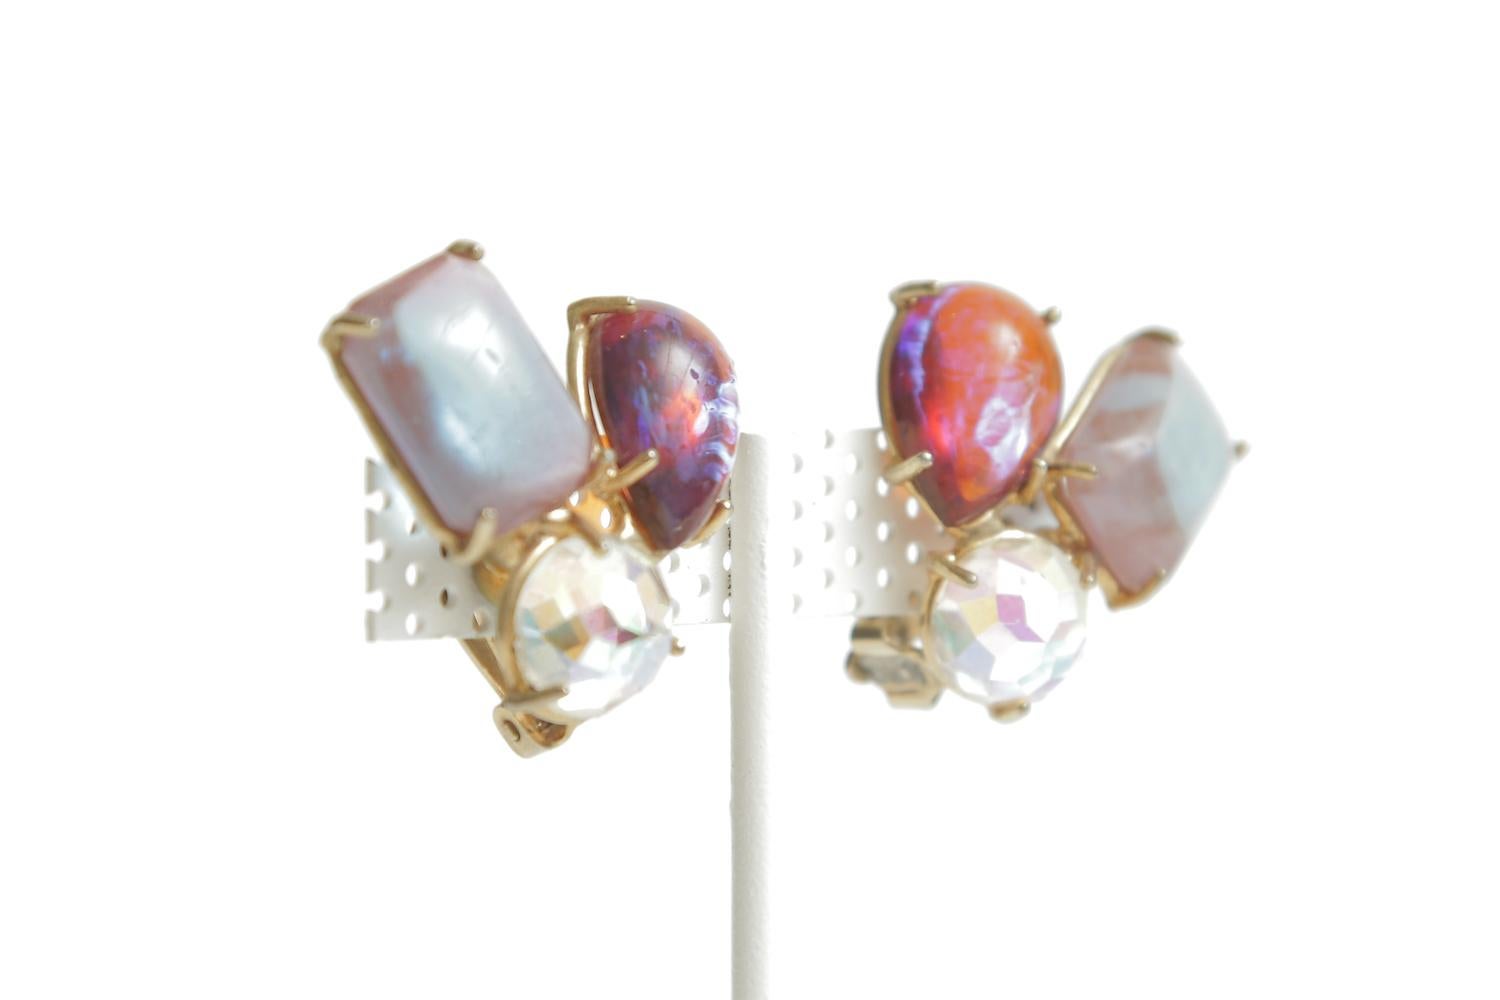  Boris Aurealis Vintage Crystal Clip On Earrings by Vogue  In Good Condition For Sale In North Miami, FL